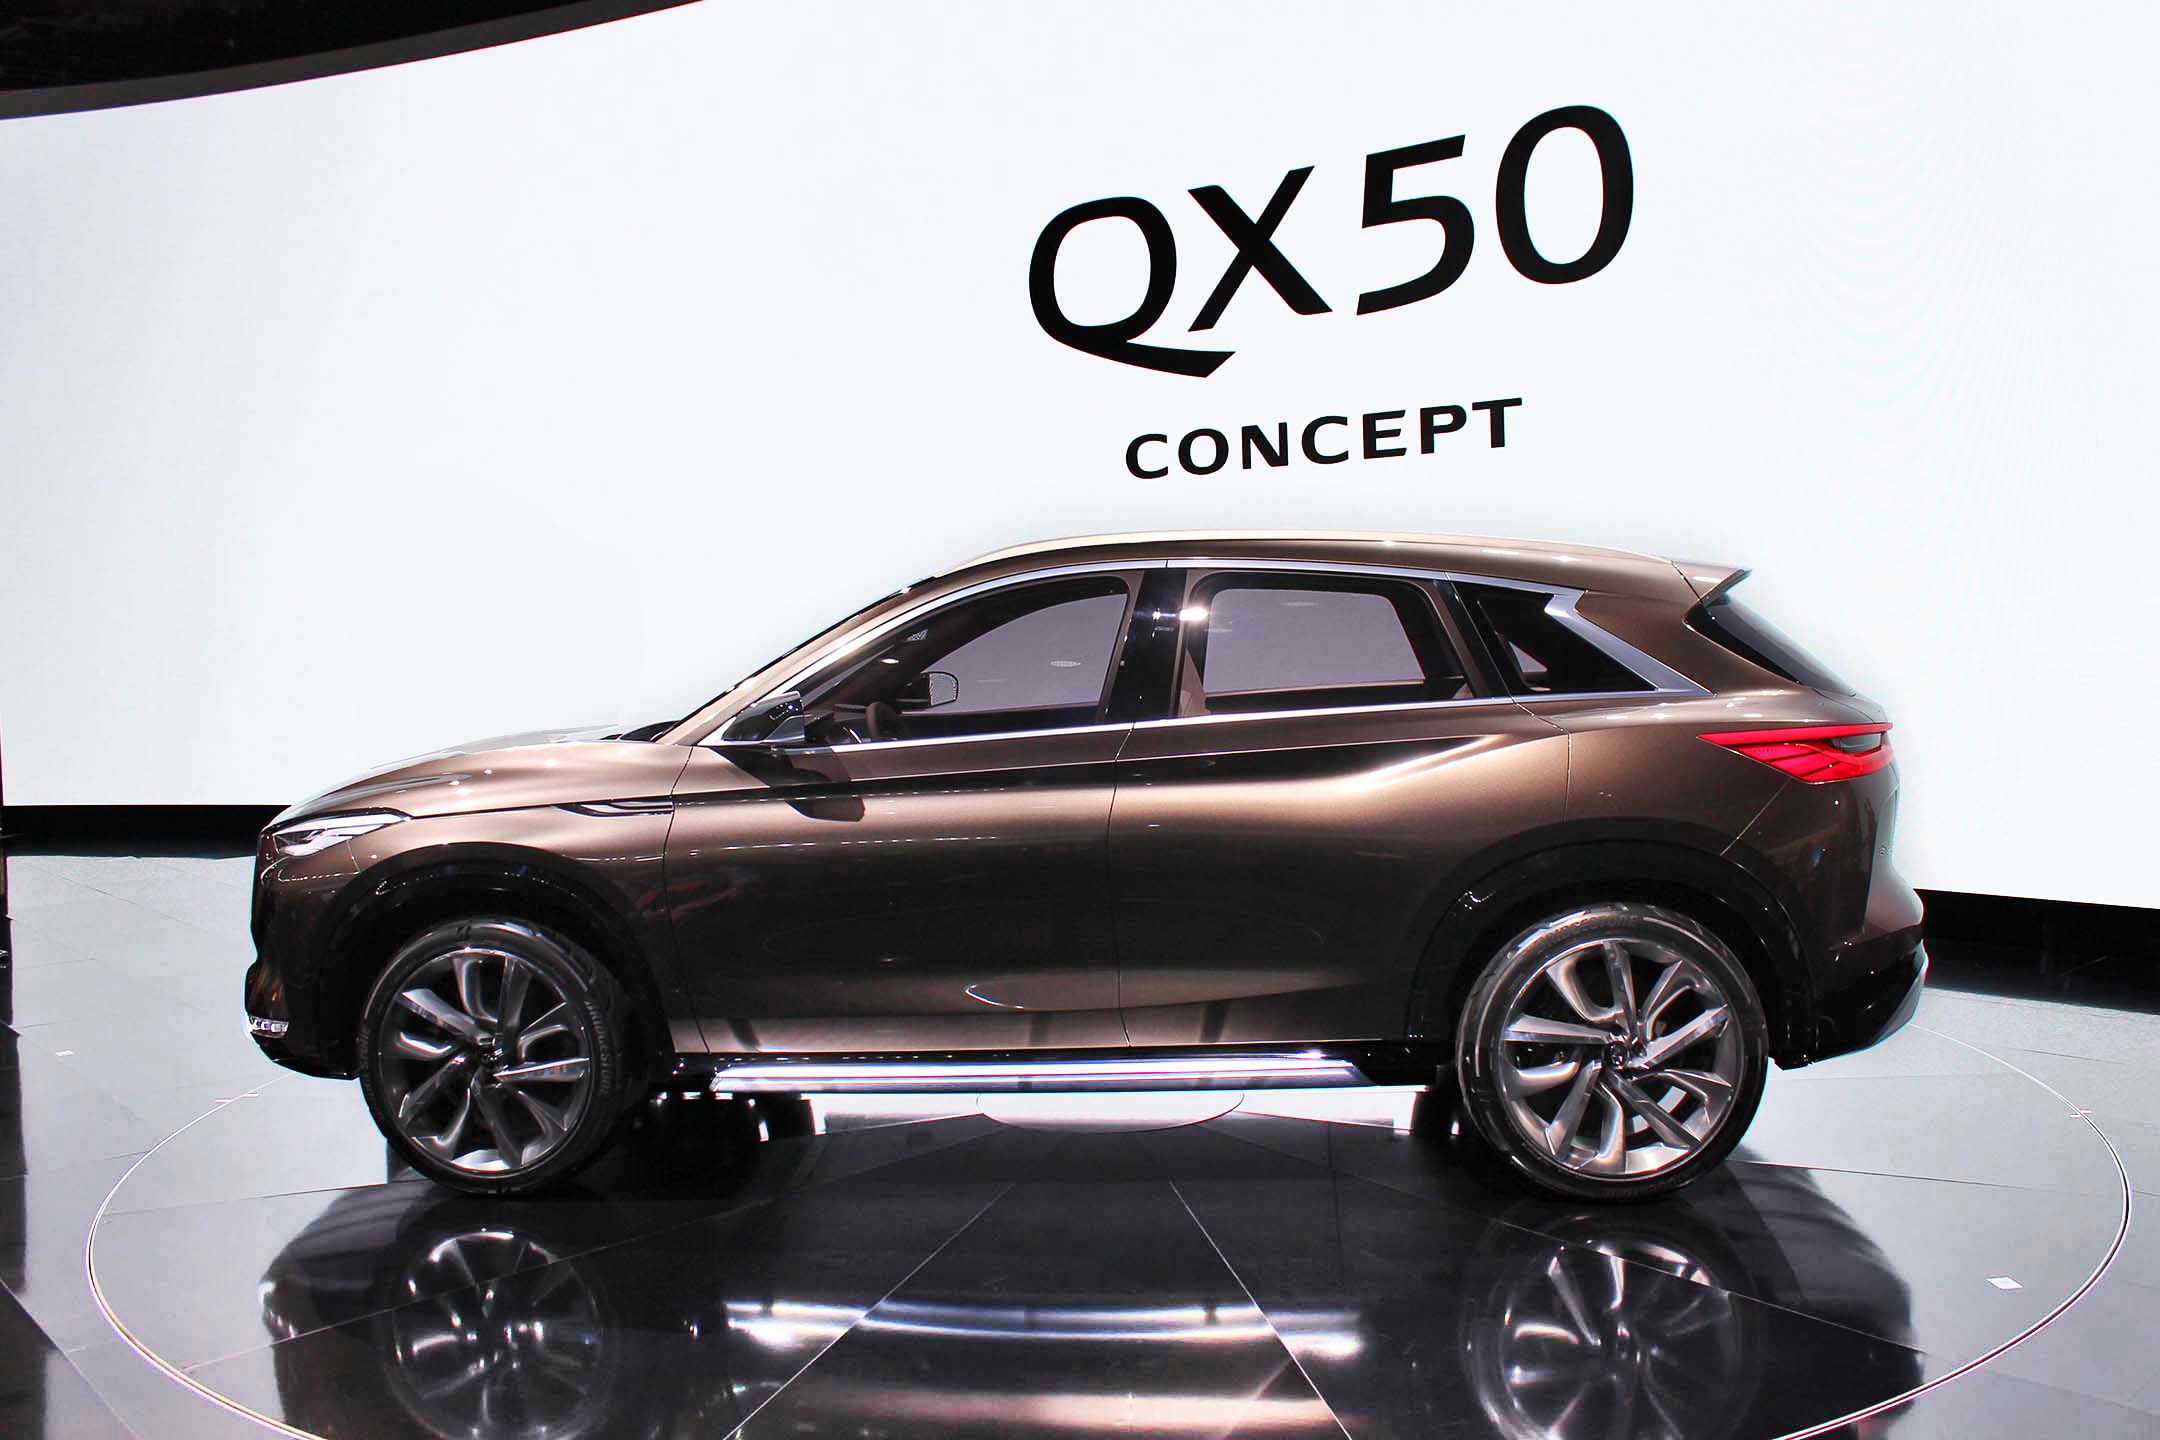 BH: The QX50 has long been one of my favorite stealth wagons, and if this concept is any indication, the compact crossover is about to become one of the most beautiful as well.